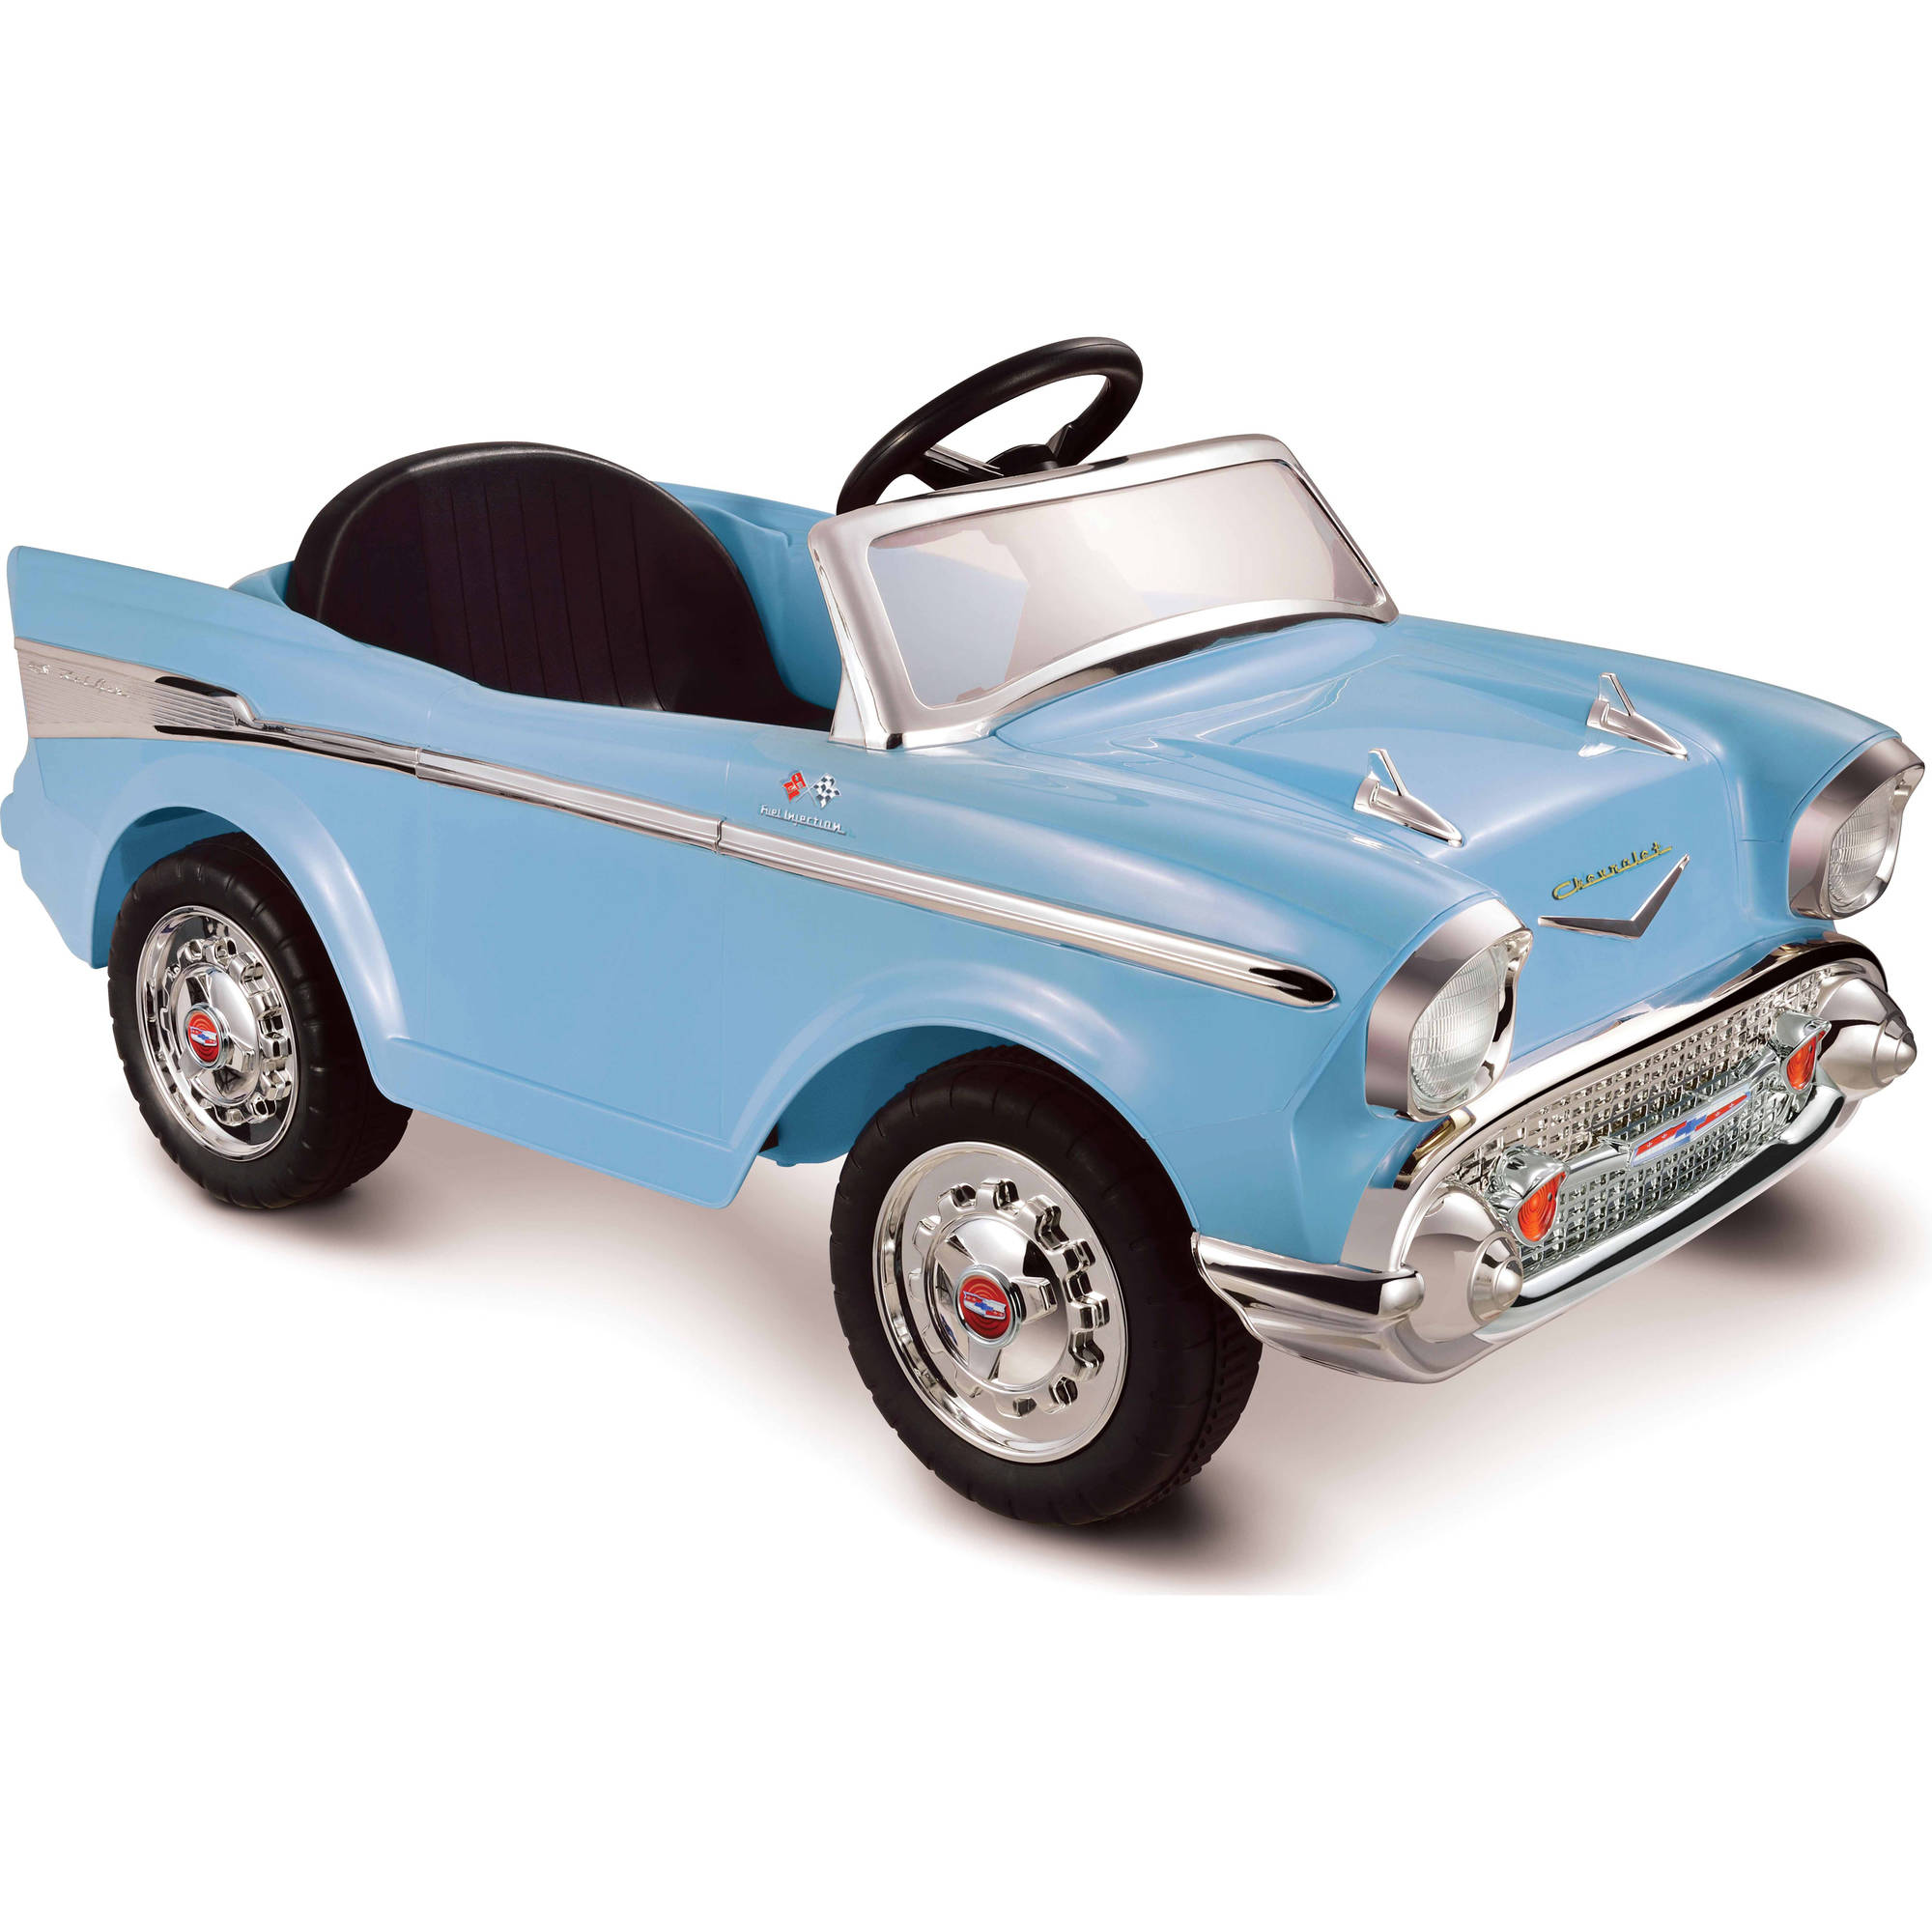 Kid Motorz 12V Chevy Bel Air Battery-Powered Ride-on in Light Blue - image 1 of 6